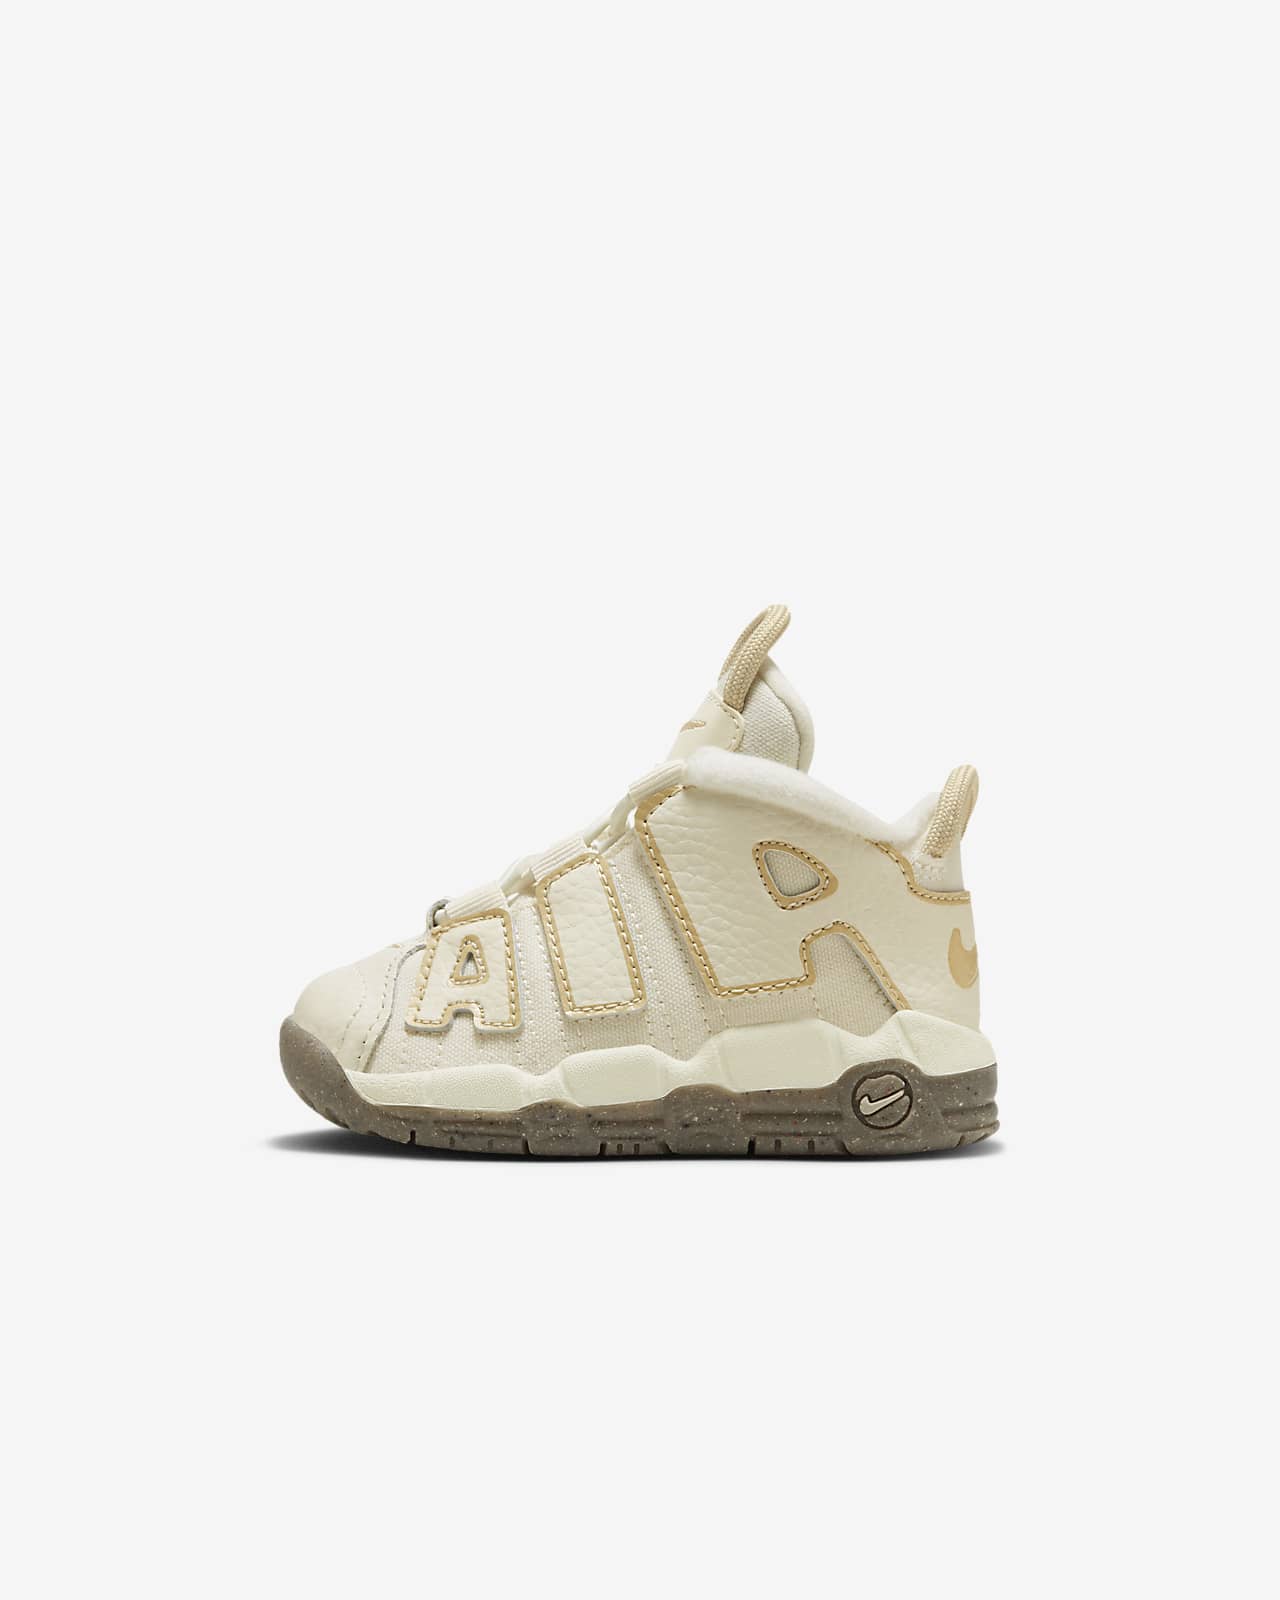 Ingrijpen Overblijvend Obsessie Nike Air More Uptempo Baby/Toddler Shoes. Nike.com